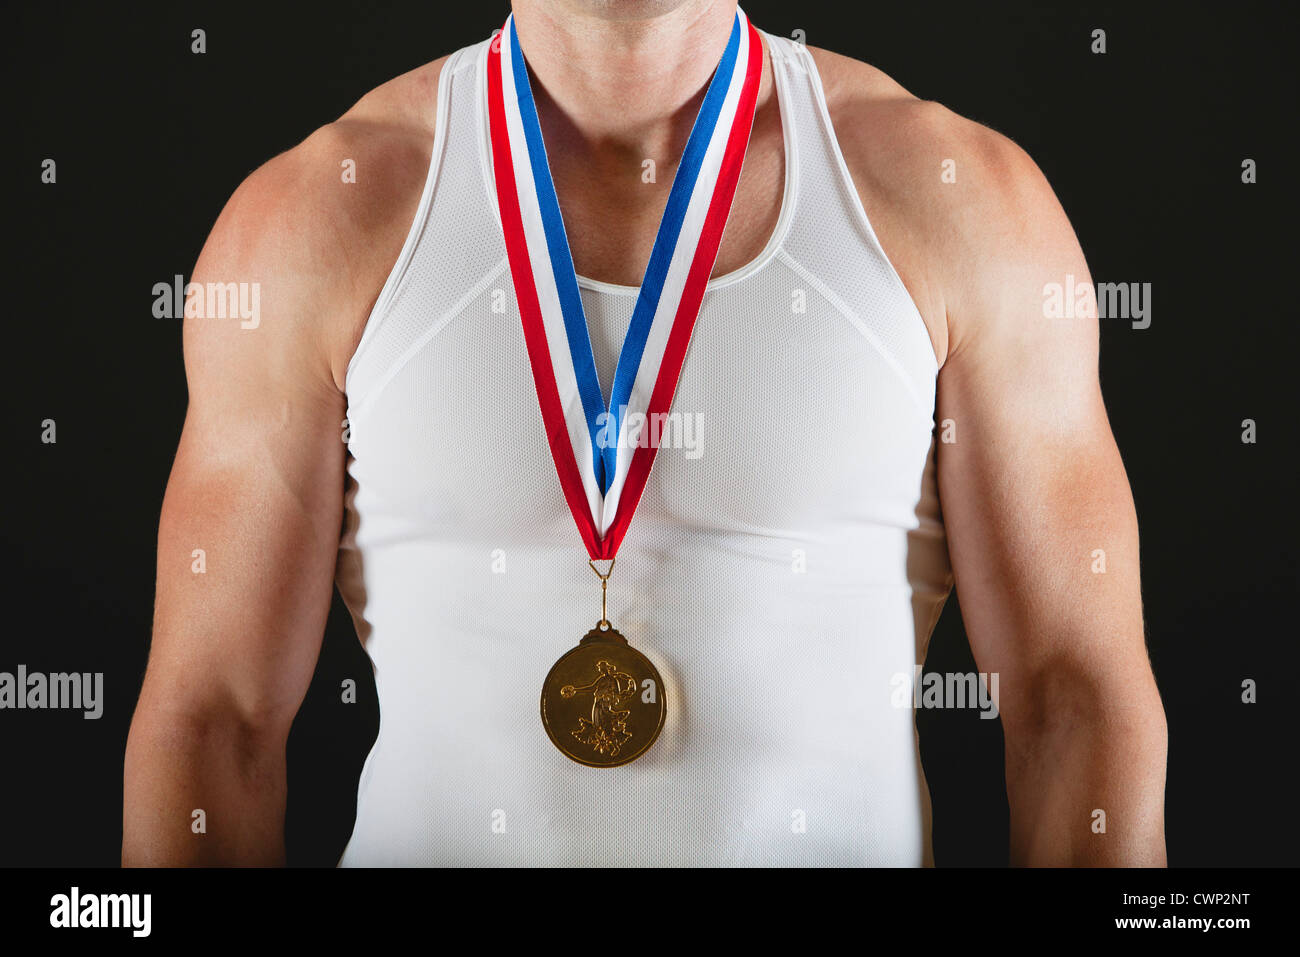 Male gymnast with gold medal, mid section Stock Photo